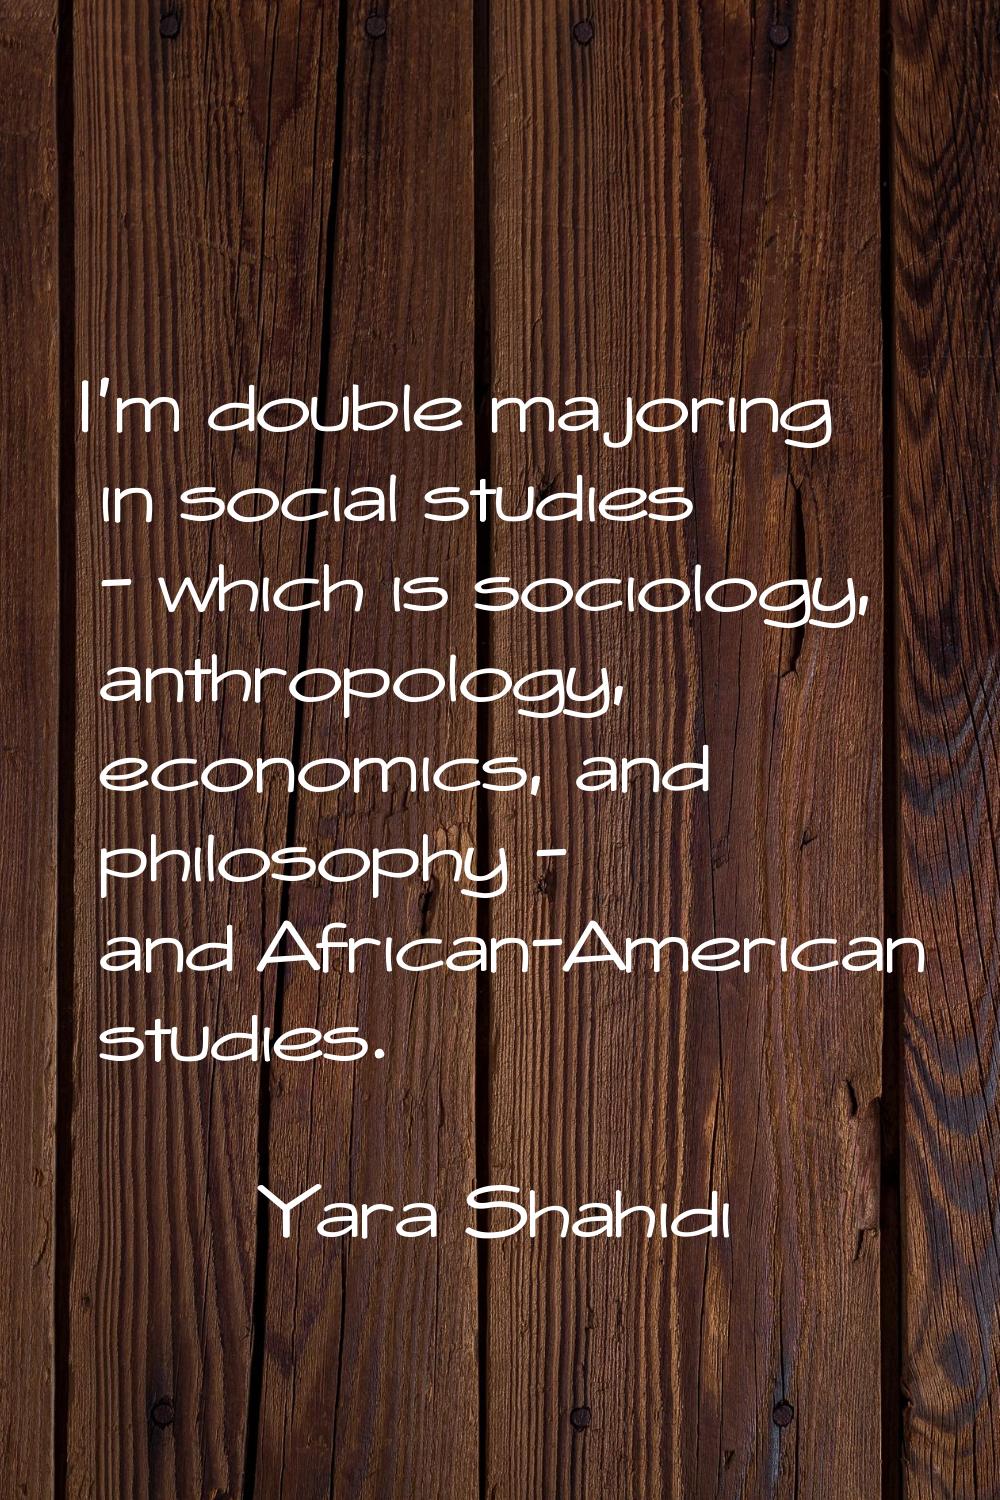 I'm double majoring in social studies - which is sociology, anthropology, economics, and philosophy